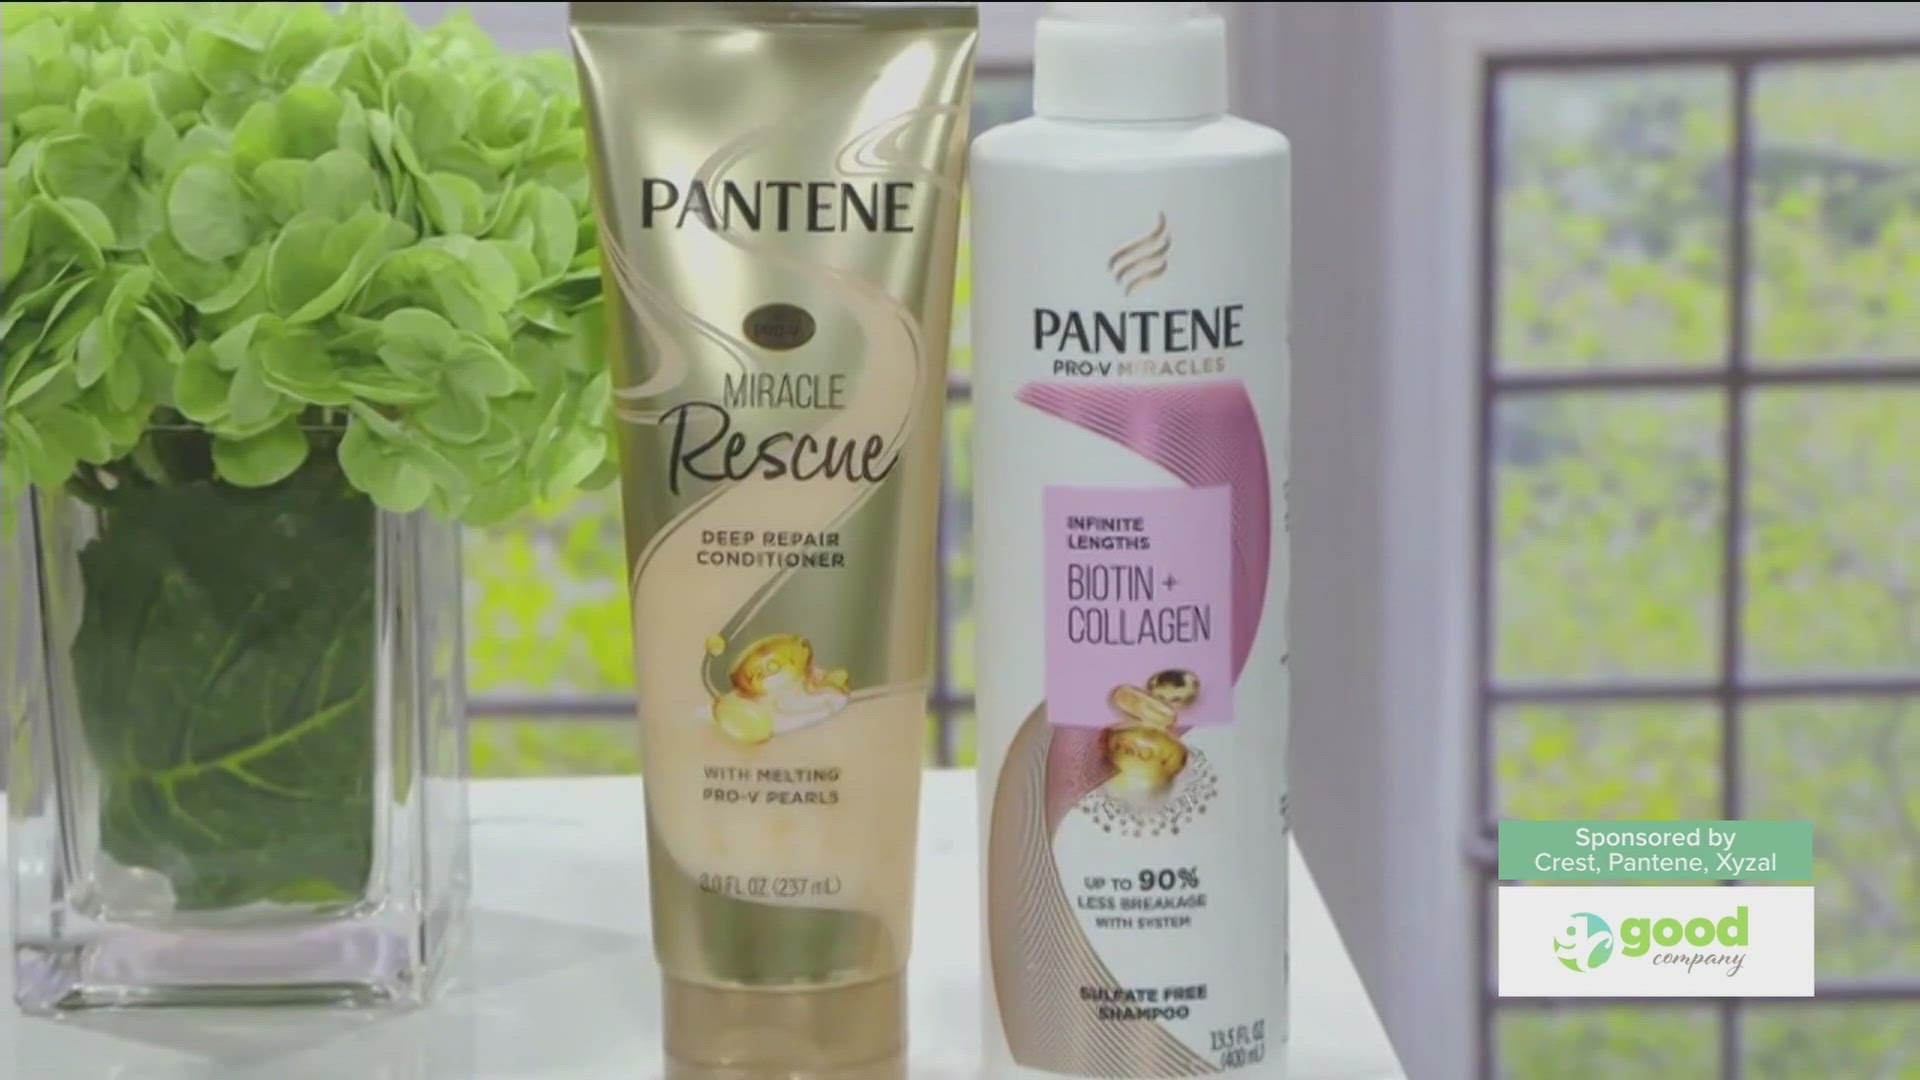 Joe talks with Joan Butler about the small changes you can make to have a healthy and beautiful spring! Sponsored by: Crest, Pantene, Xyzal